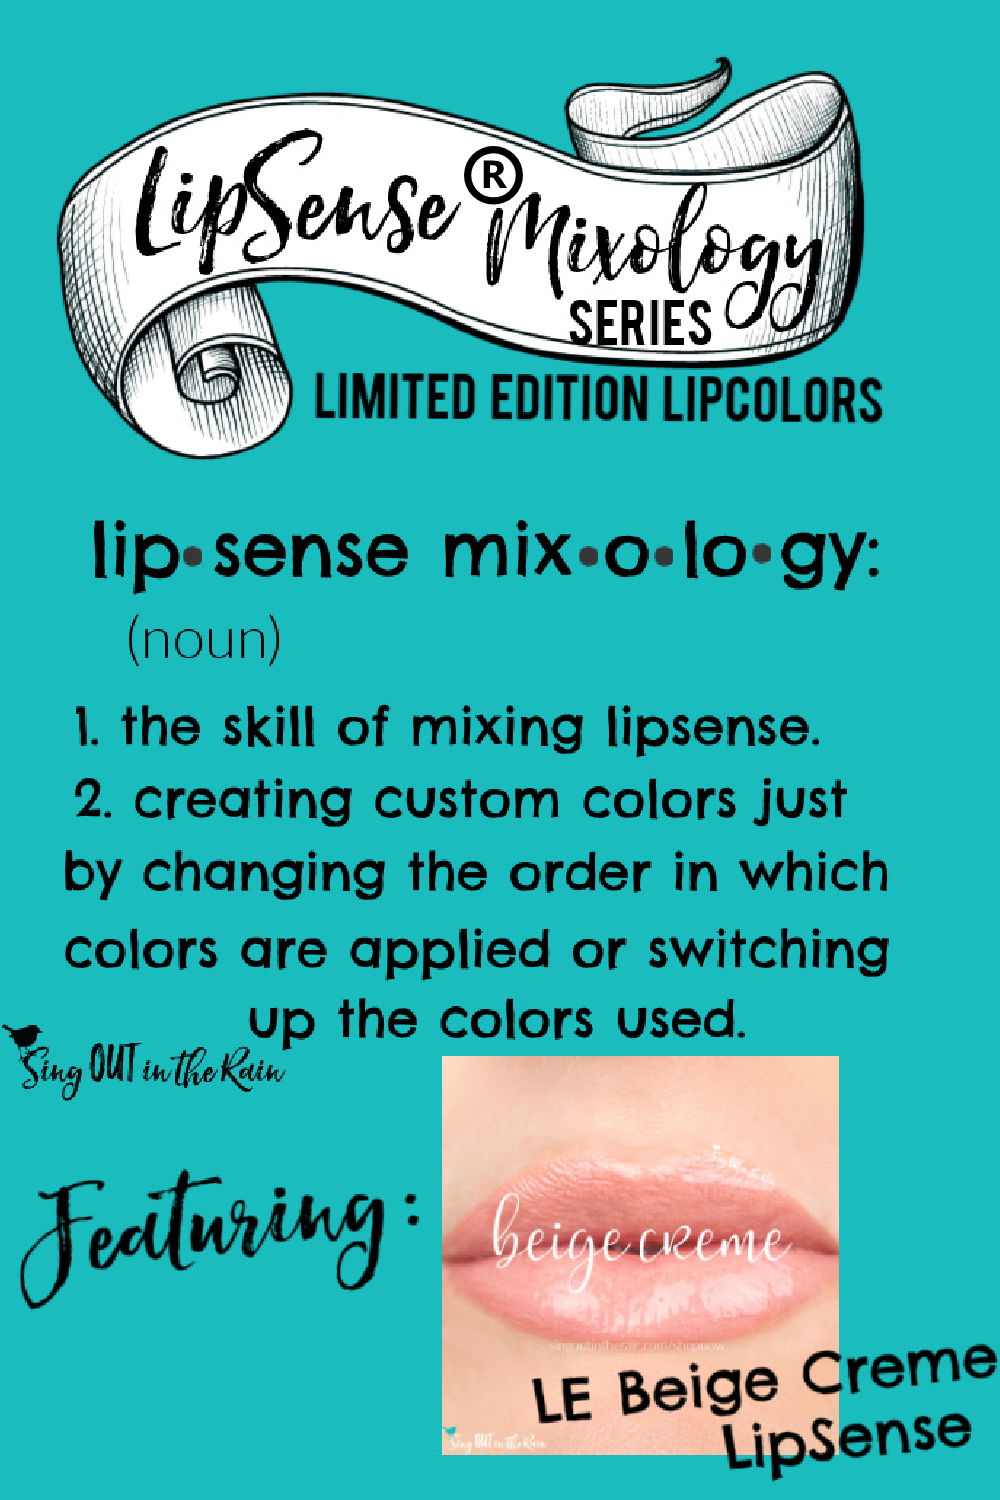 The Ultimate Guide to Beige Creme LipSense Mixology